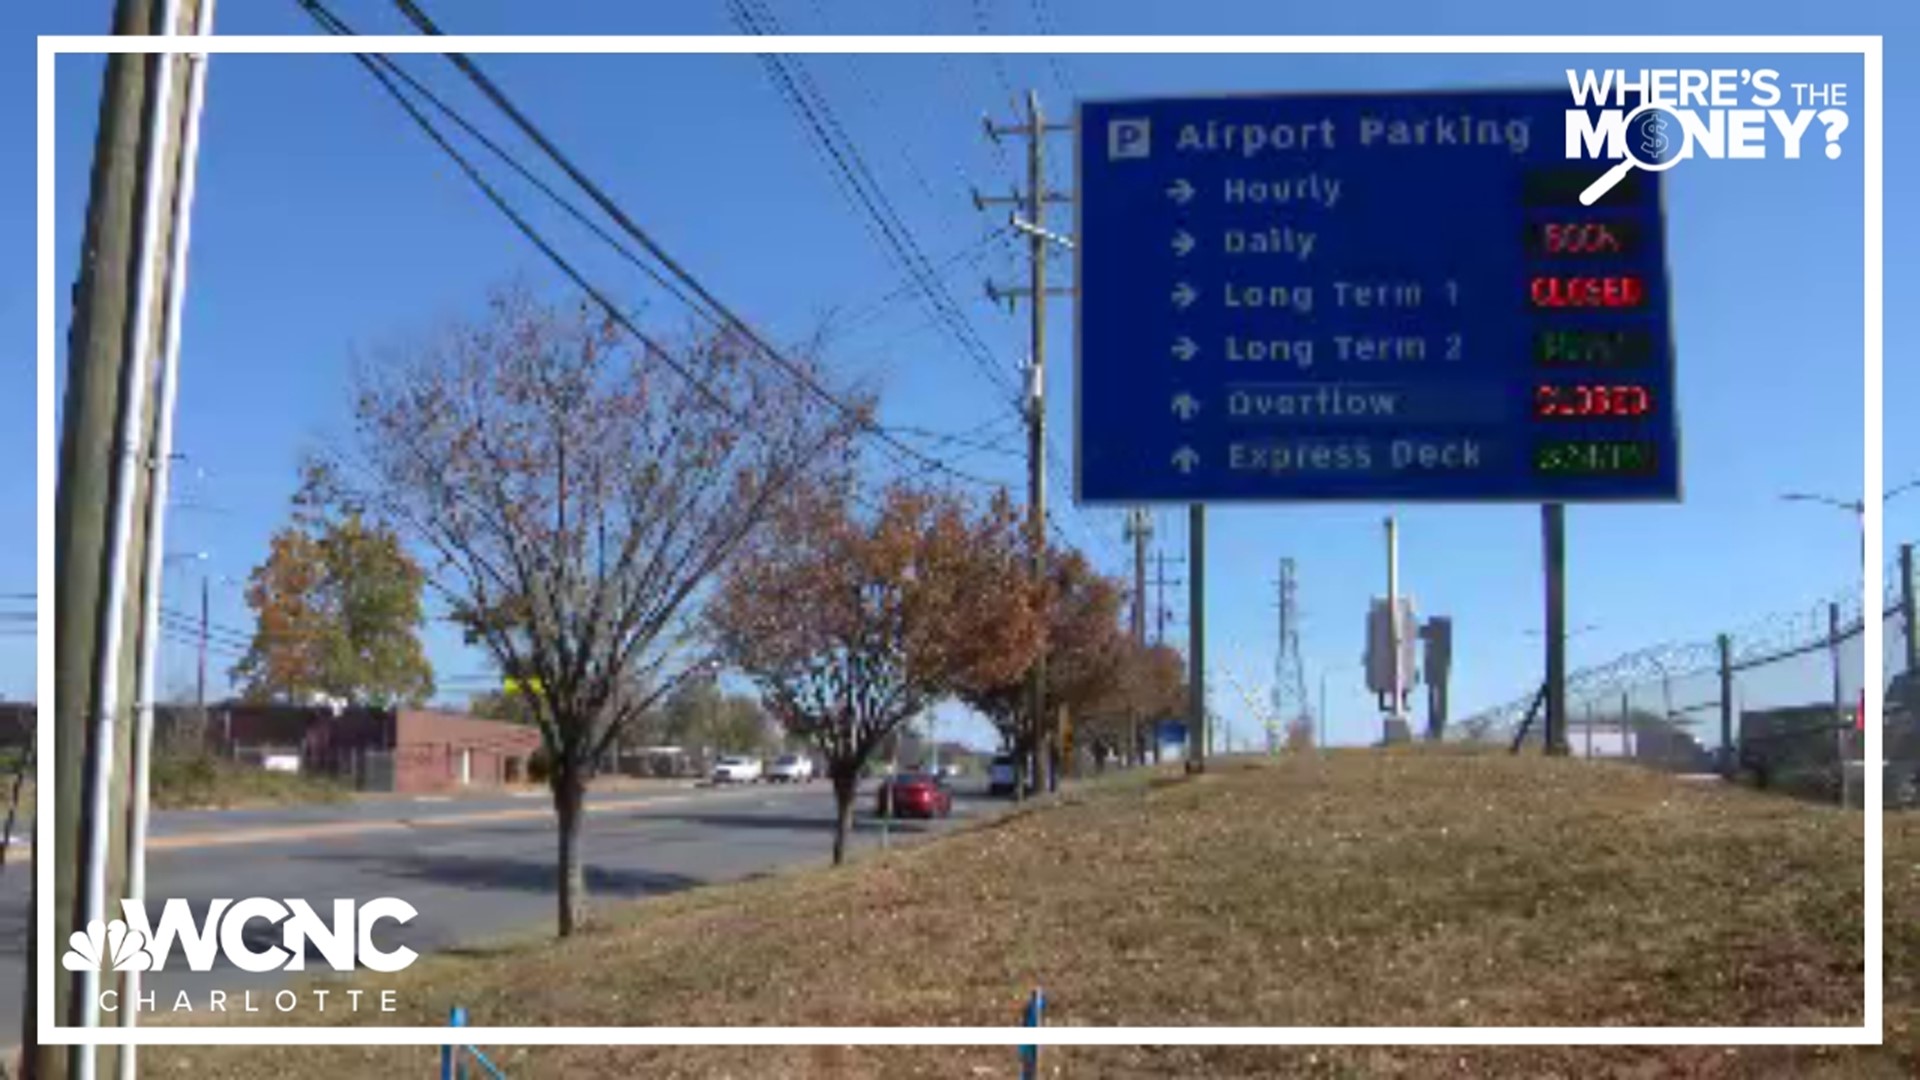 Paying to park at Charlotte Douglas Airport just got a little pricier.